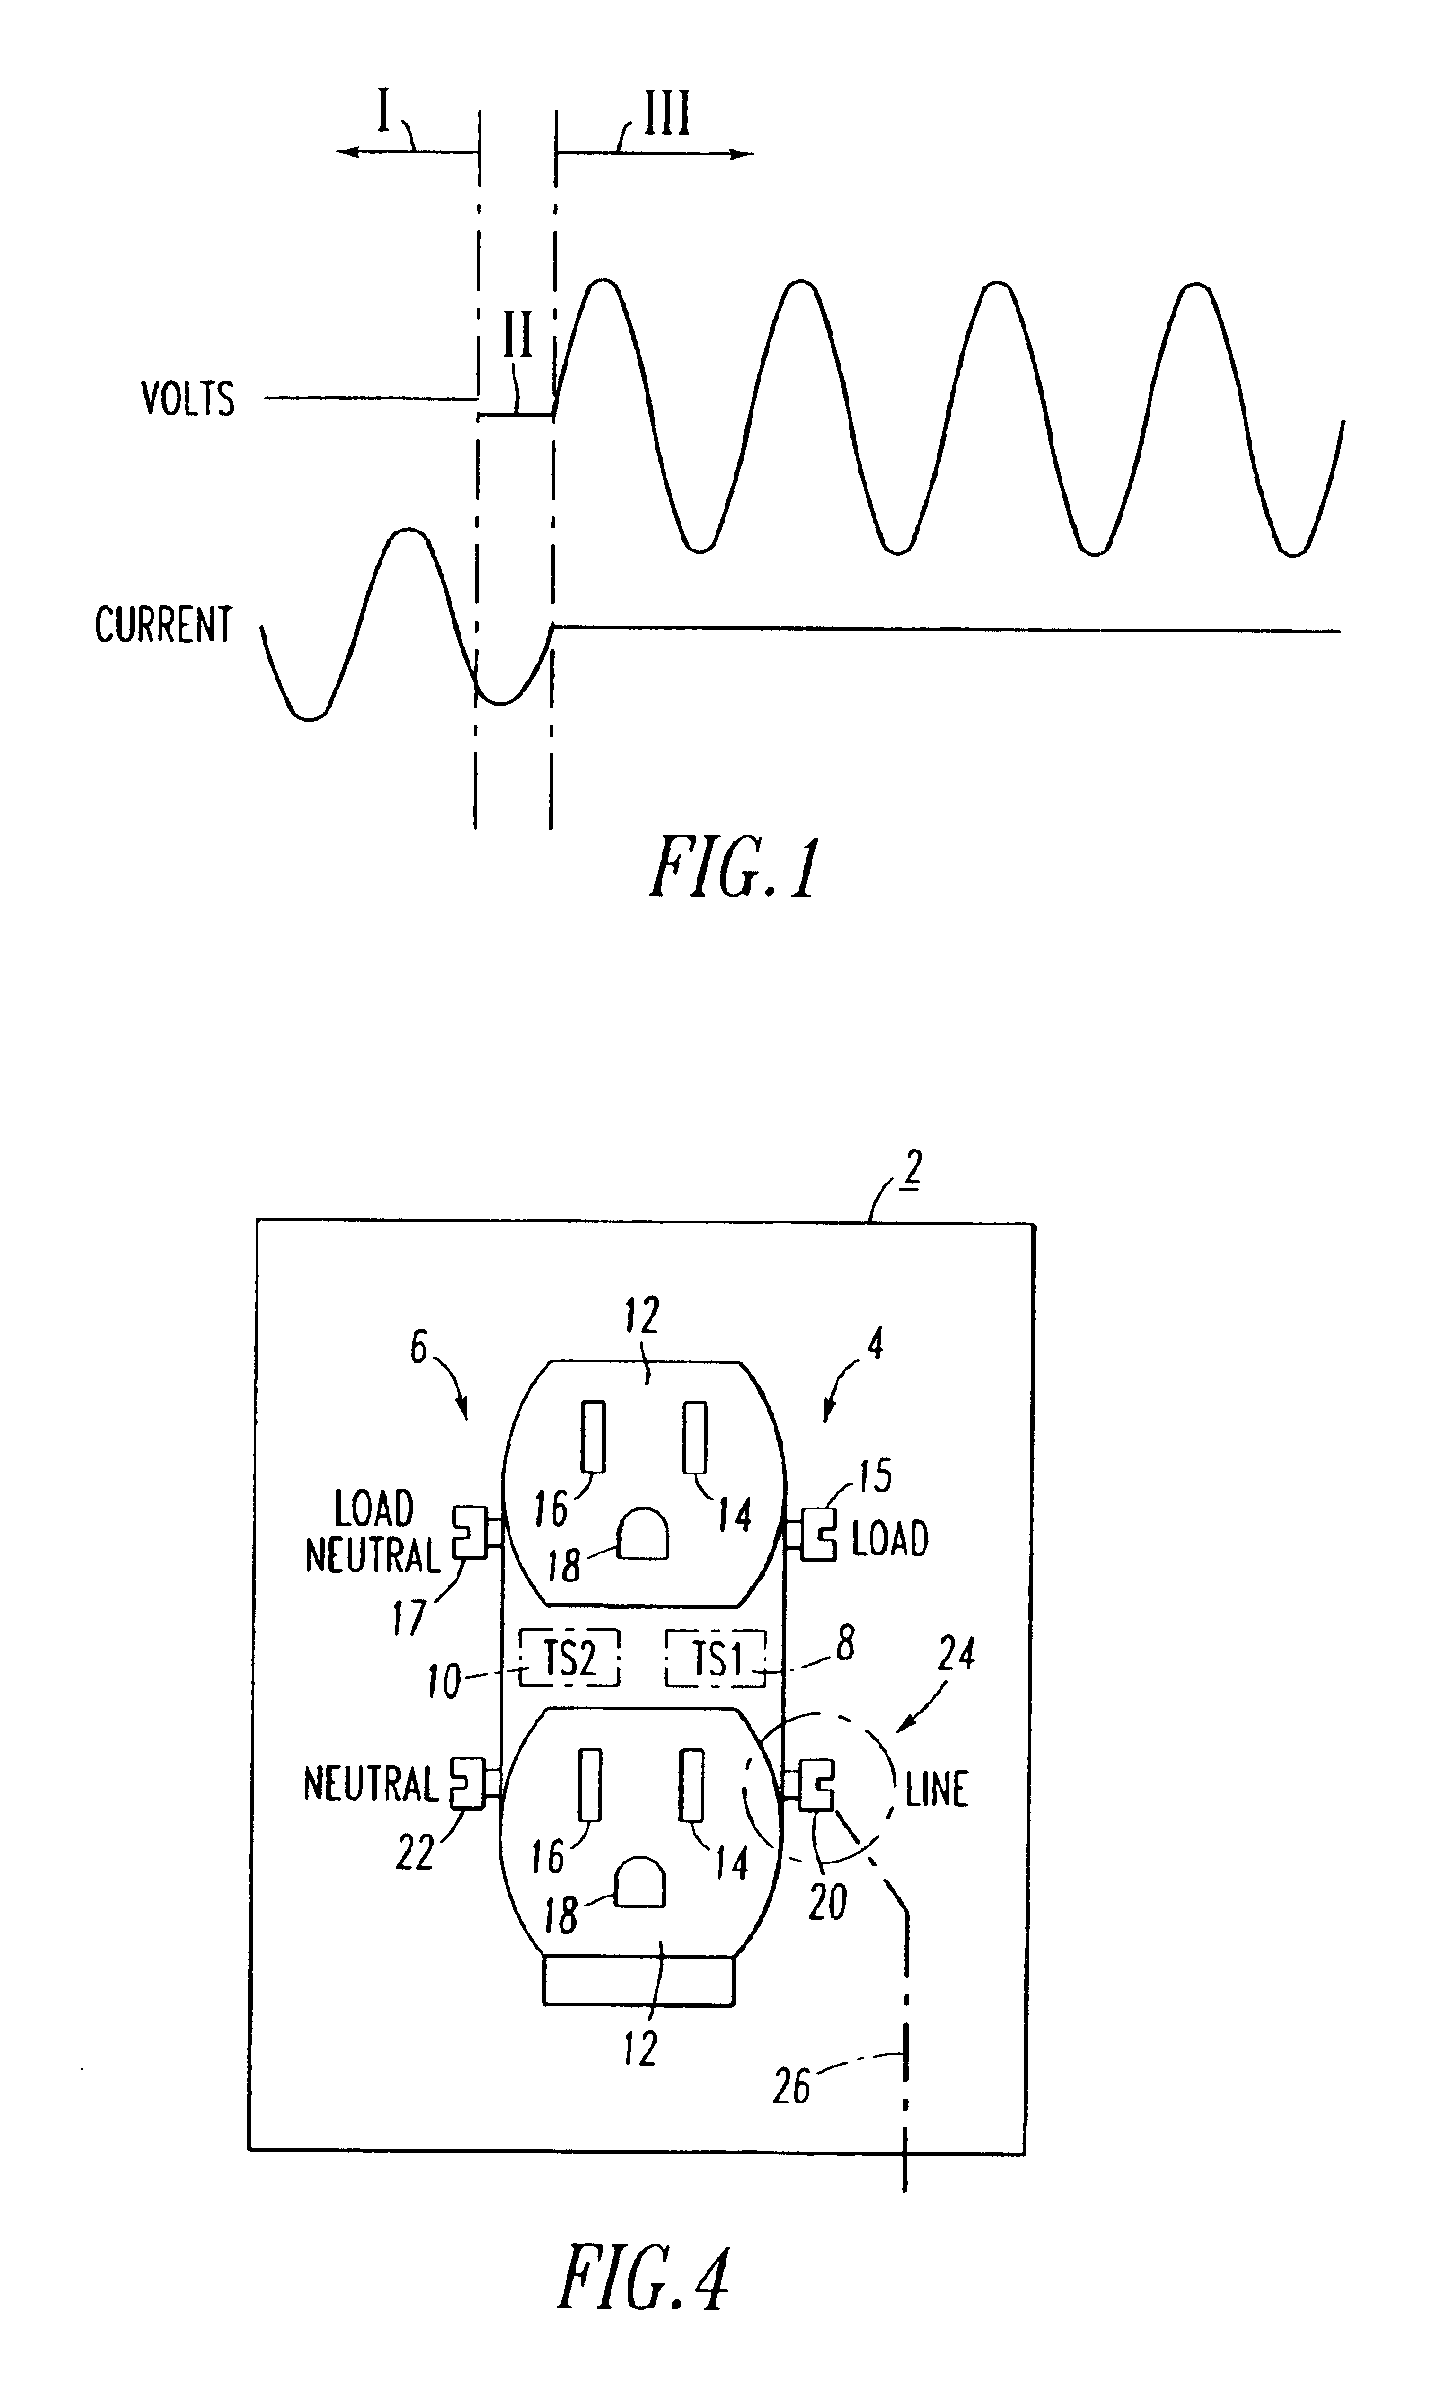 Test apparatus for power circuits of an electrical distribution device